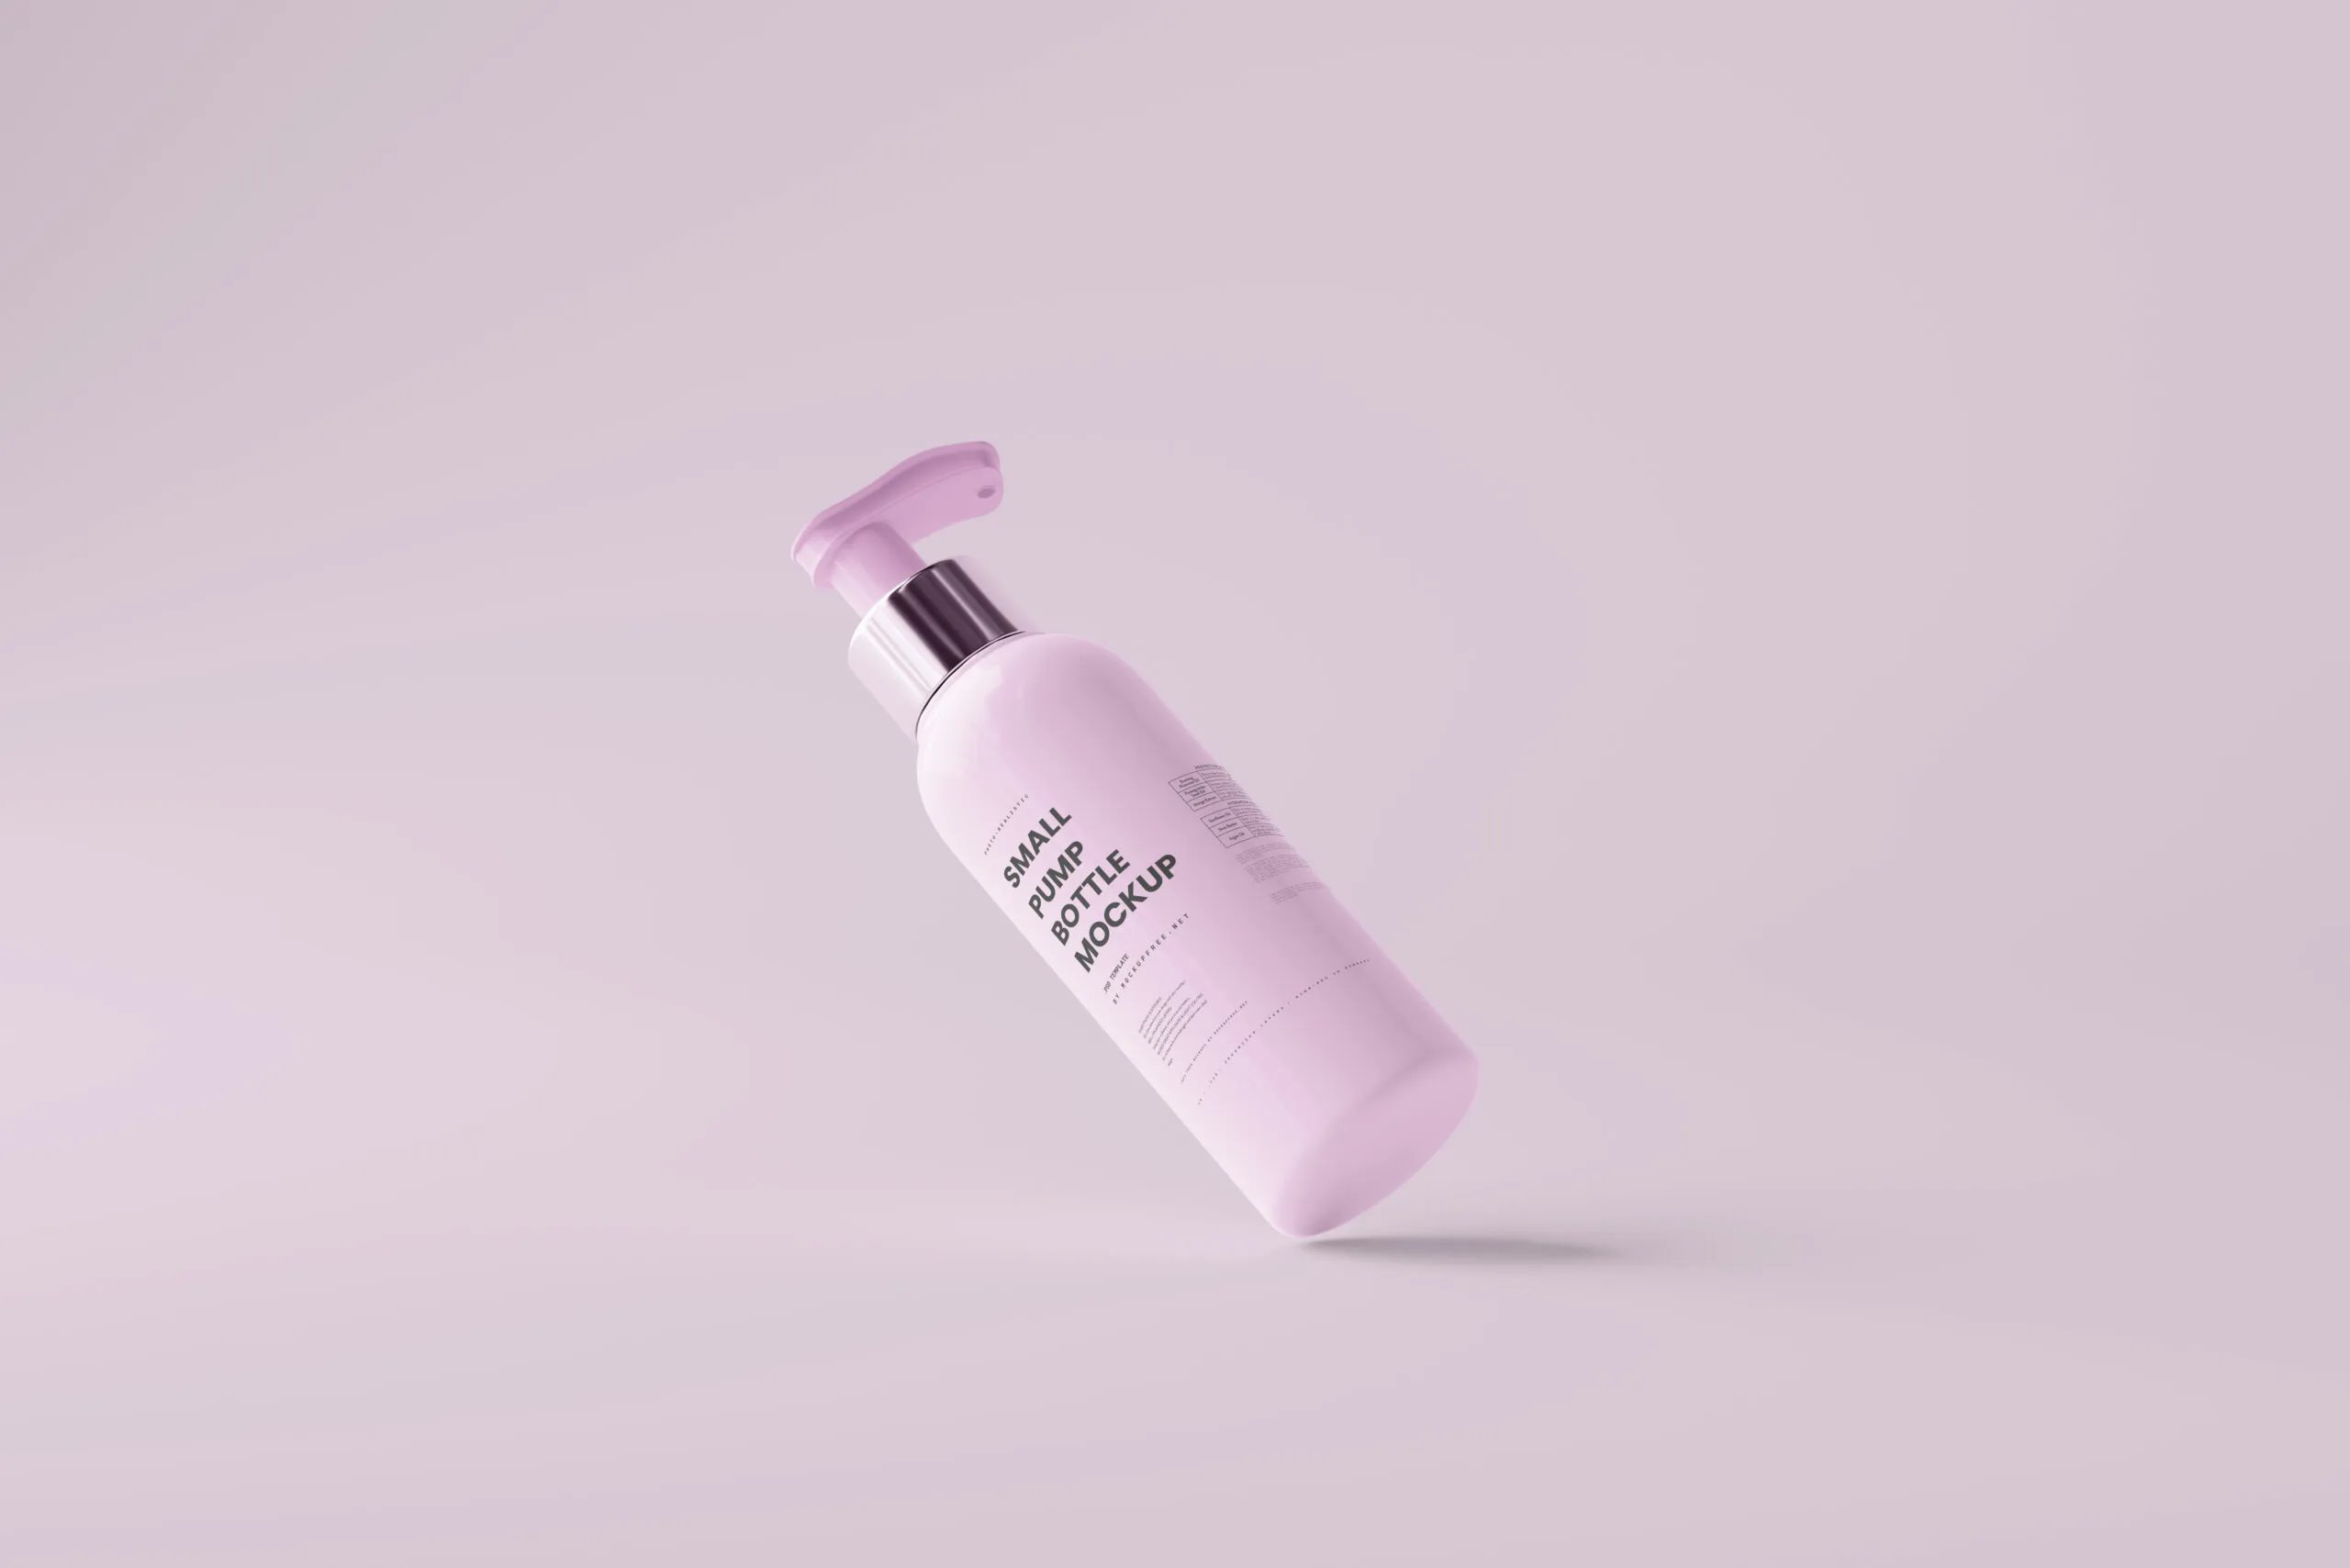 5 Small Pump Bottle Mockup in Front and Perspective Sights FREE PSD